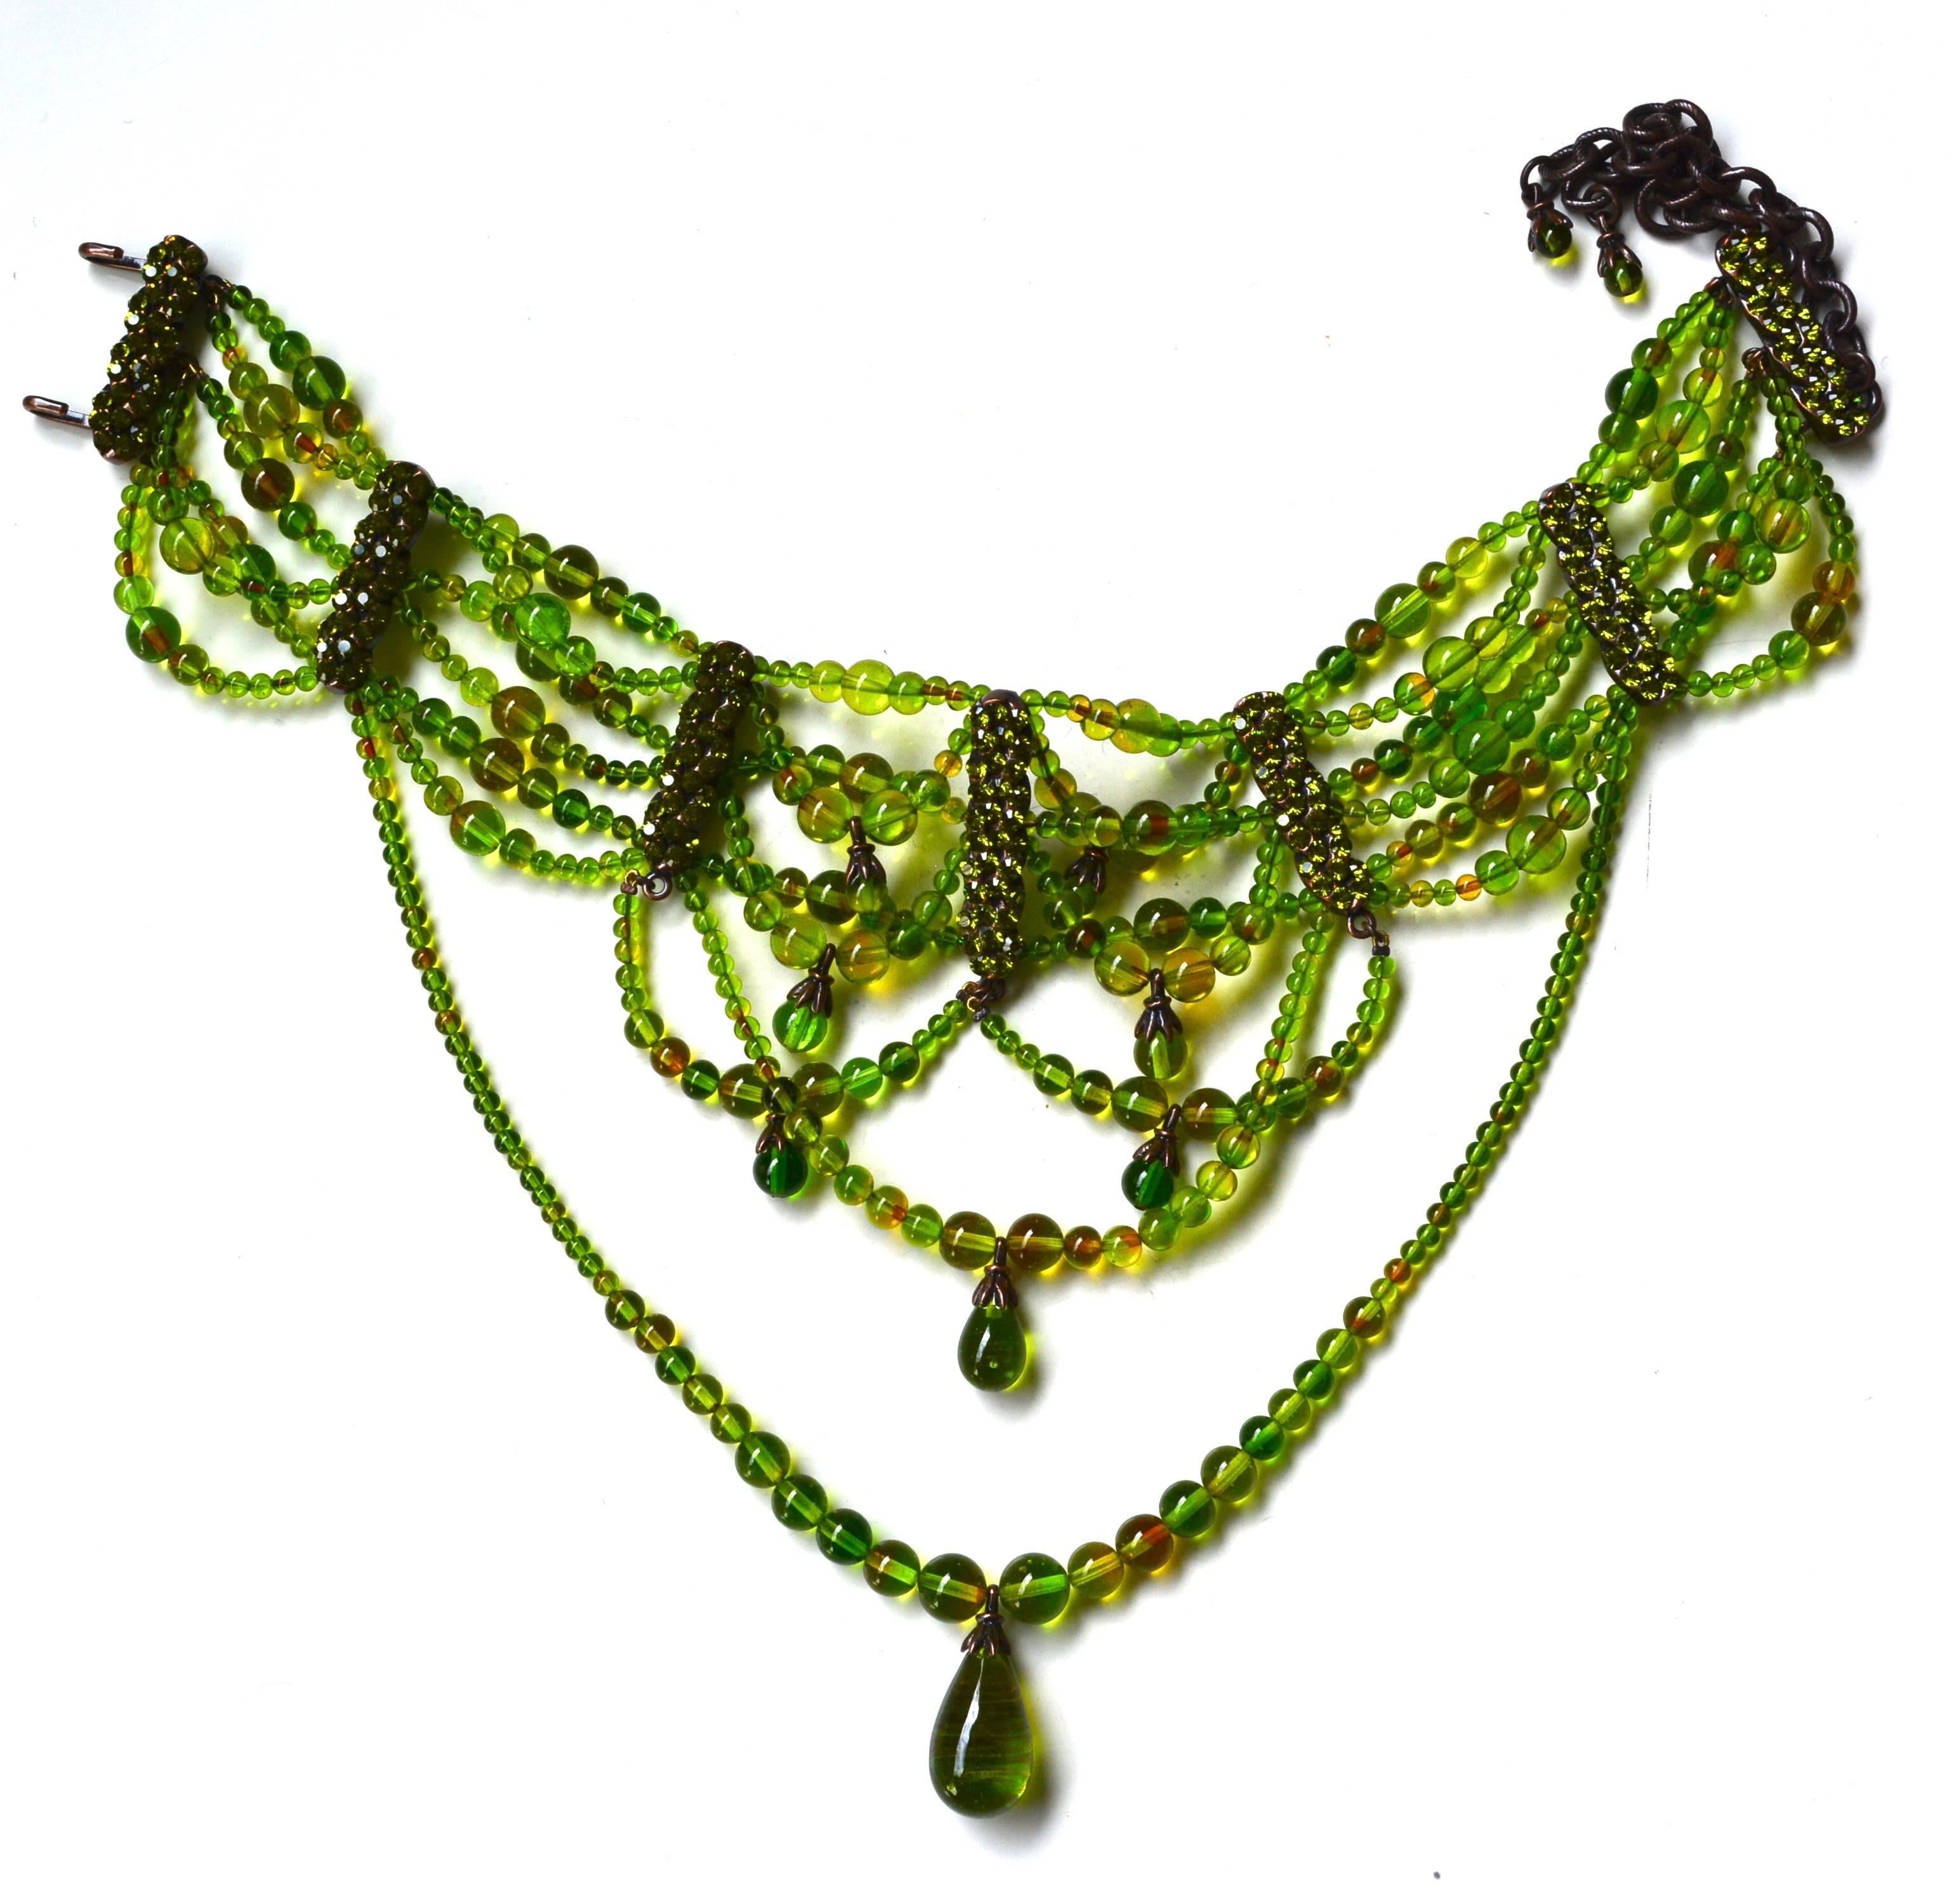 Rare double set of gorgeous multi toned green glass bead corset inspired necklaces by John Galliano for Dior. Maison Goossens made. These are possibly couture or limited run and came directly from a French collection in Paris. The quality and